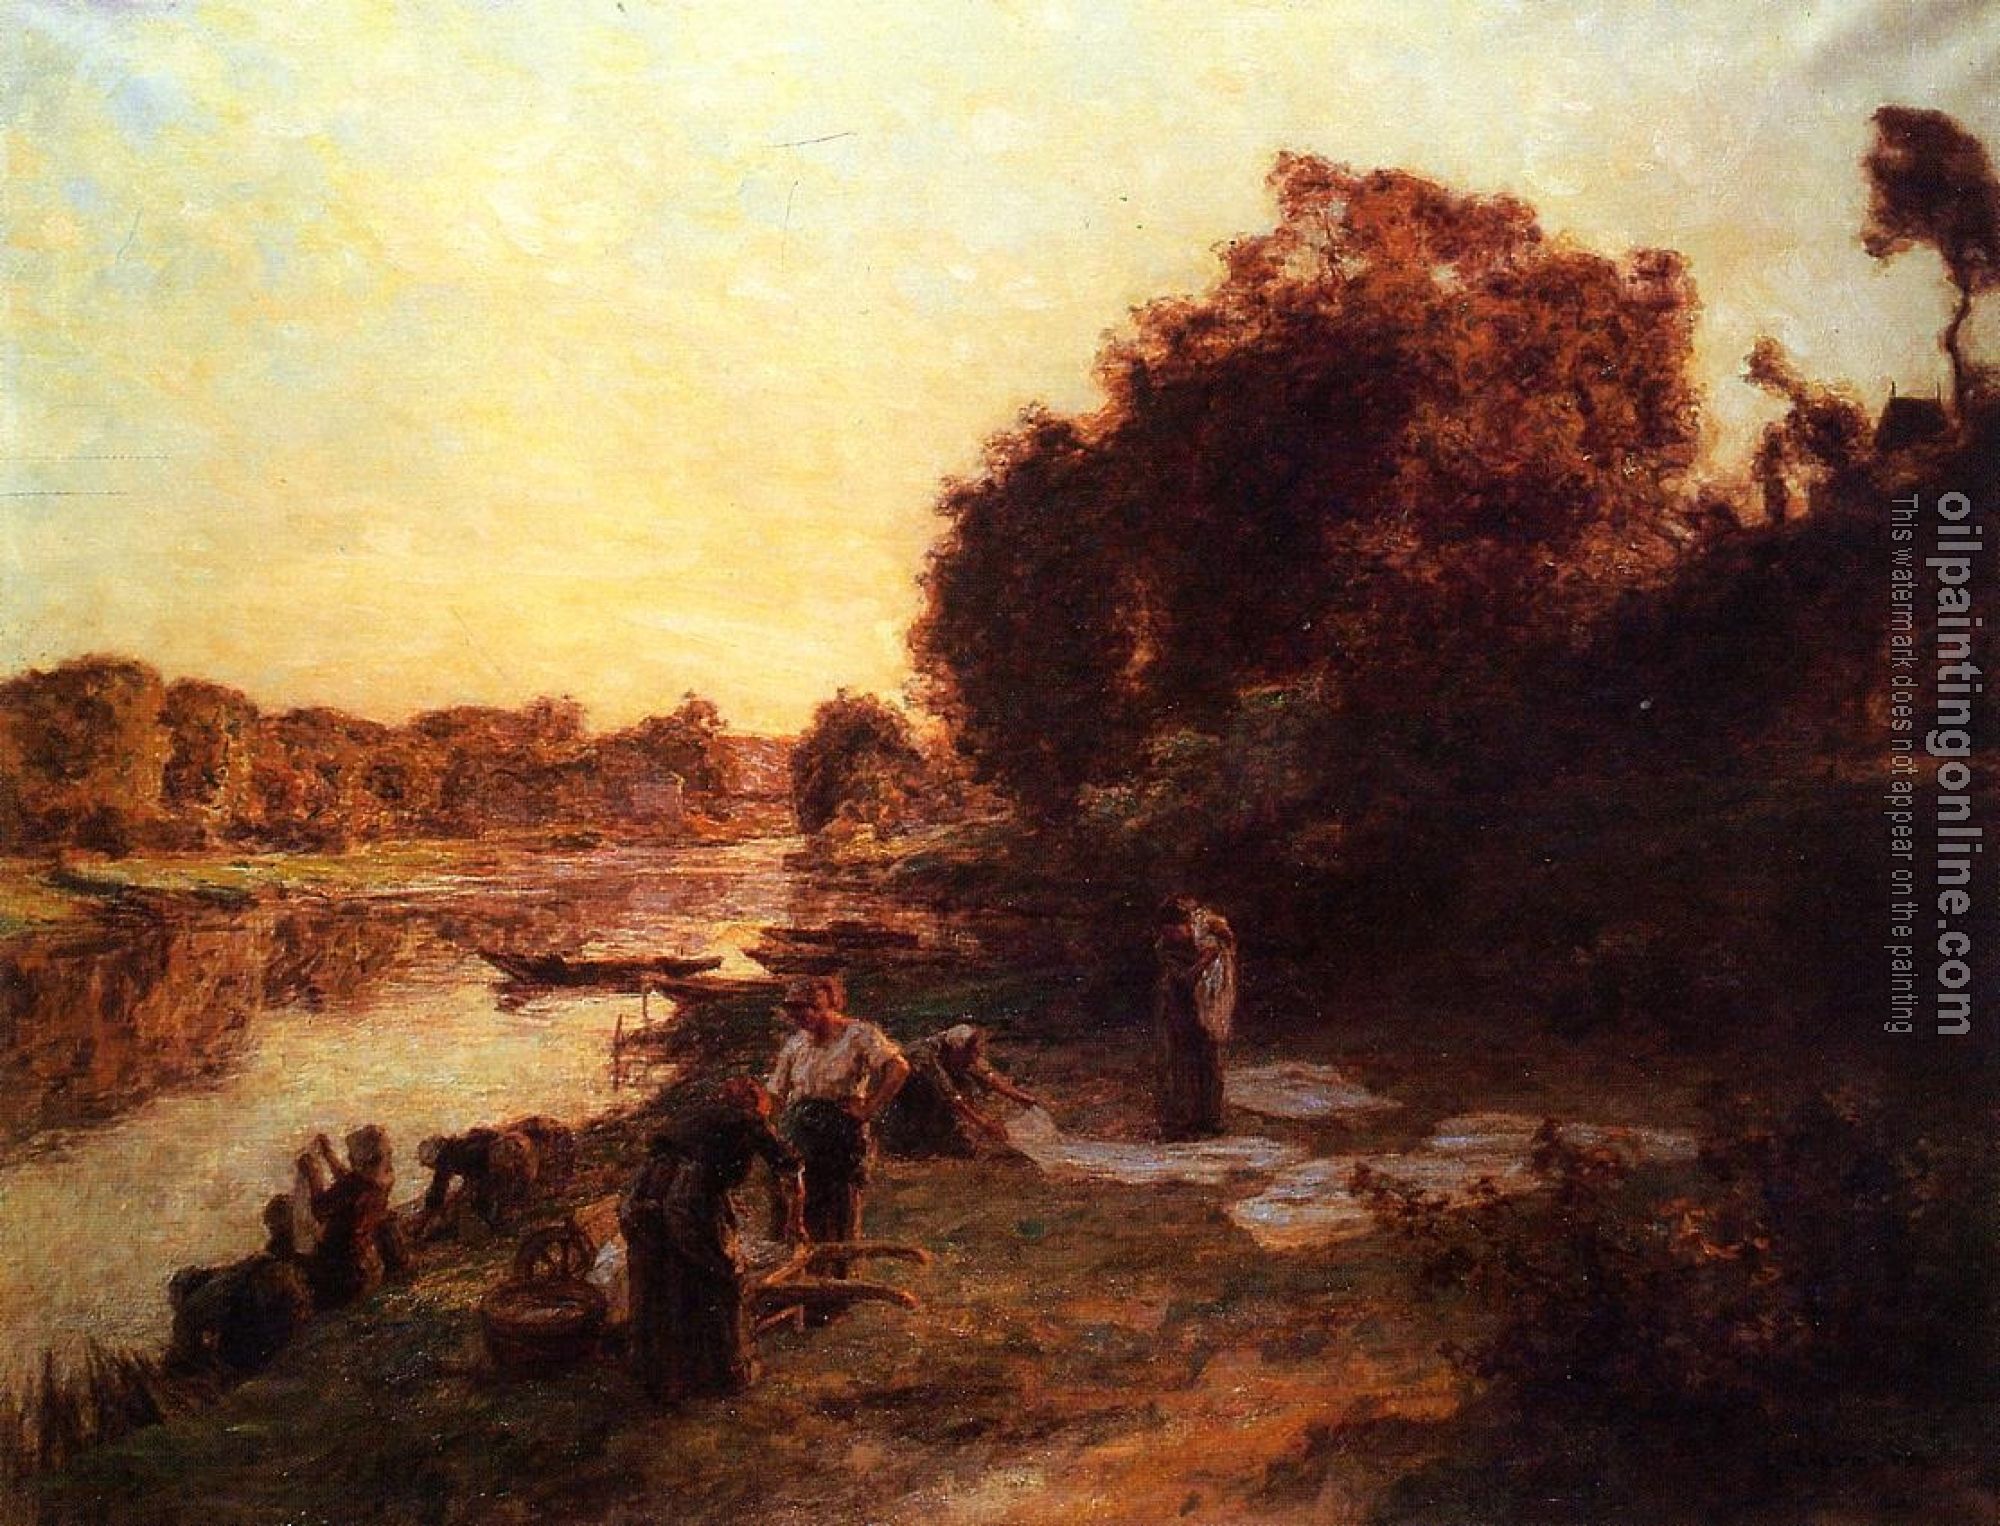 Lhermitte, Leon Augustin - Washerwomen by the Banks of the Marne